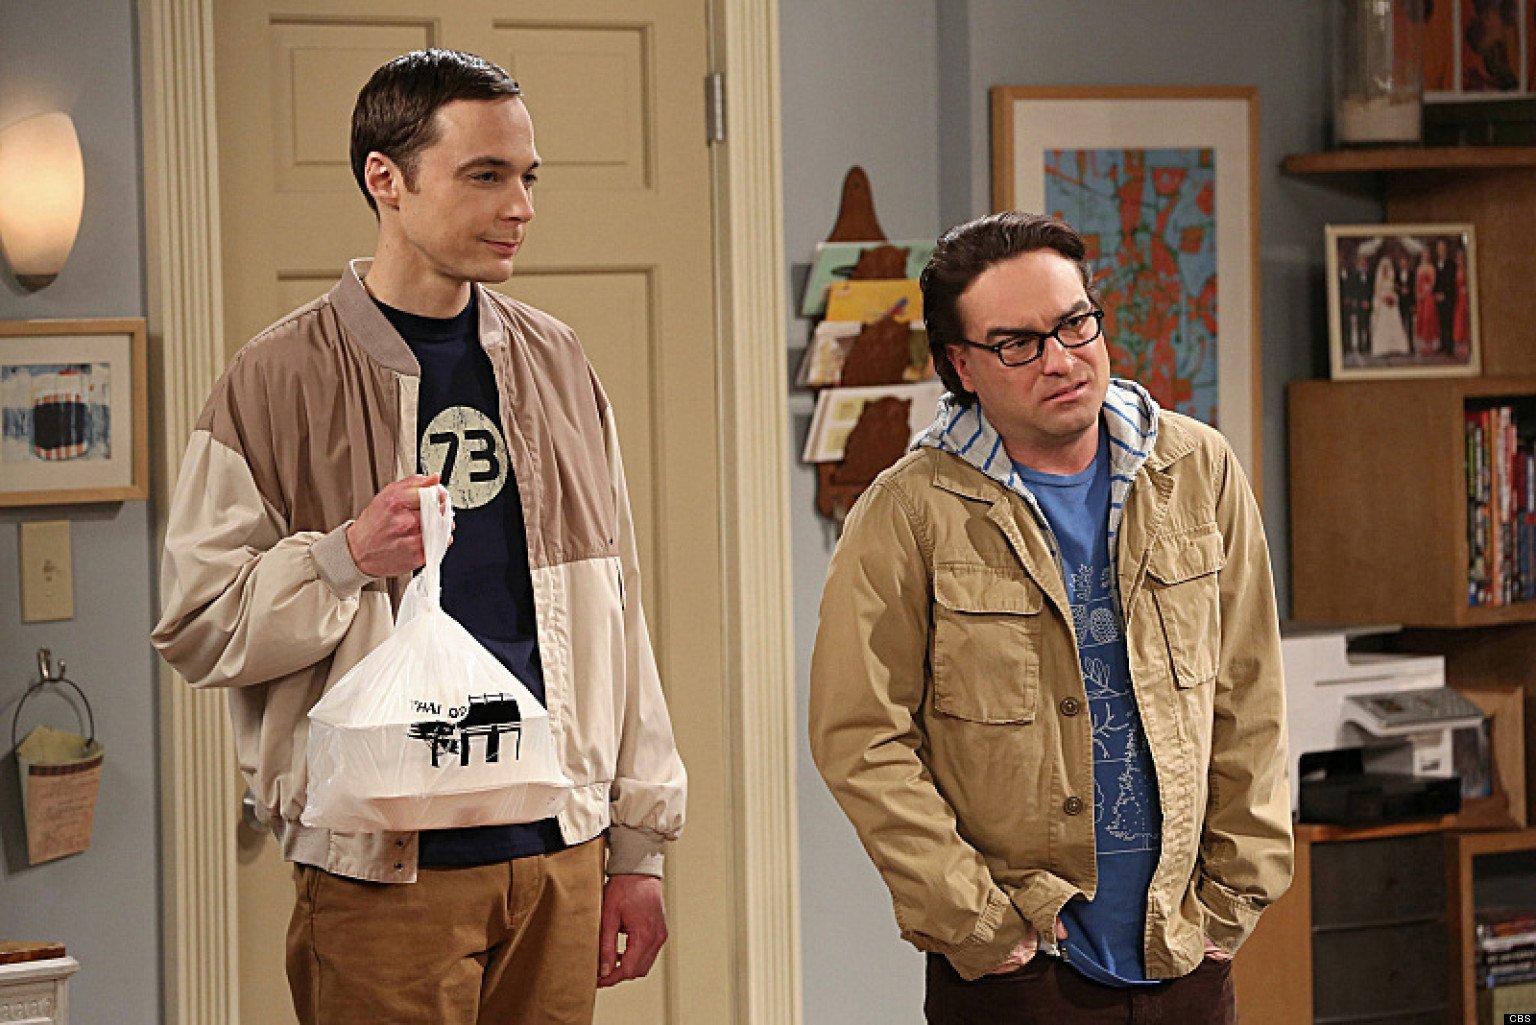 Sheldon and Leonard stand next to each other while holding bags of food